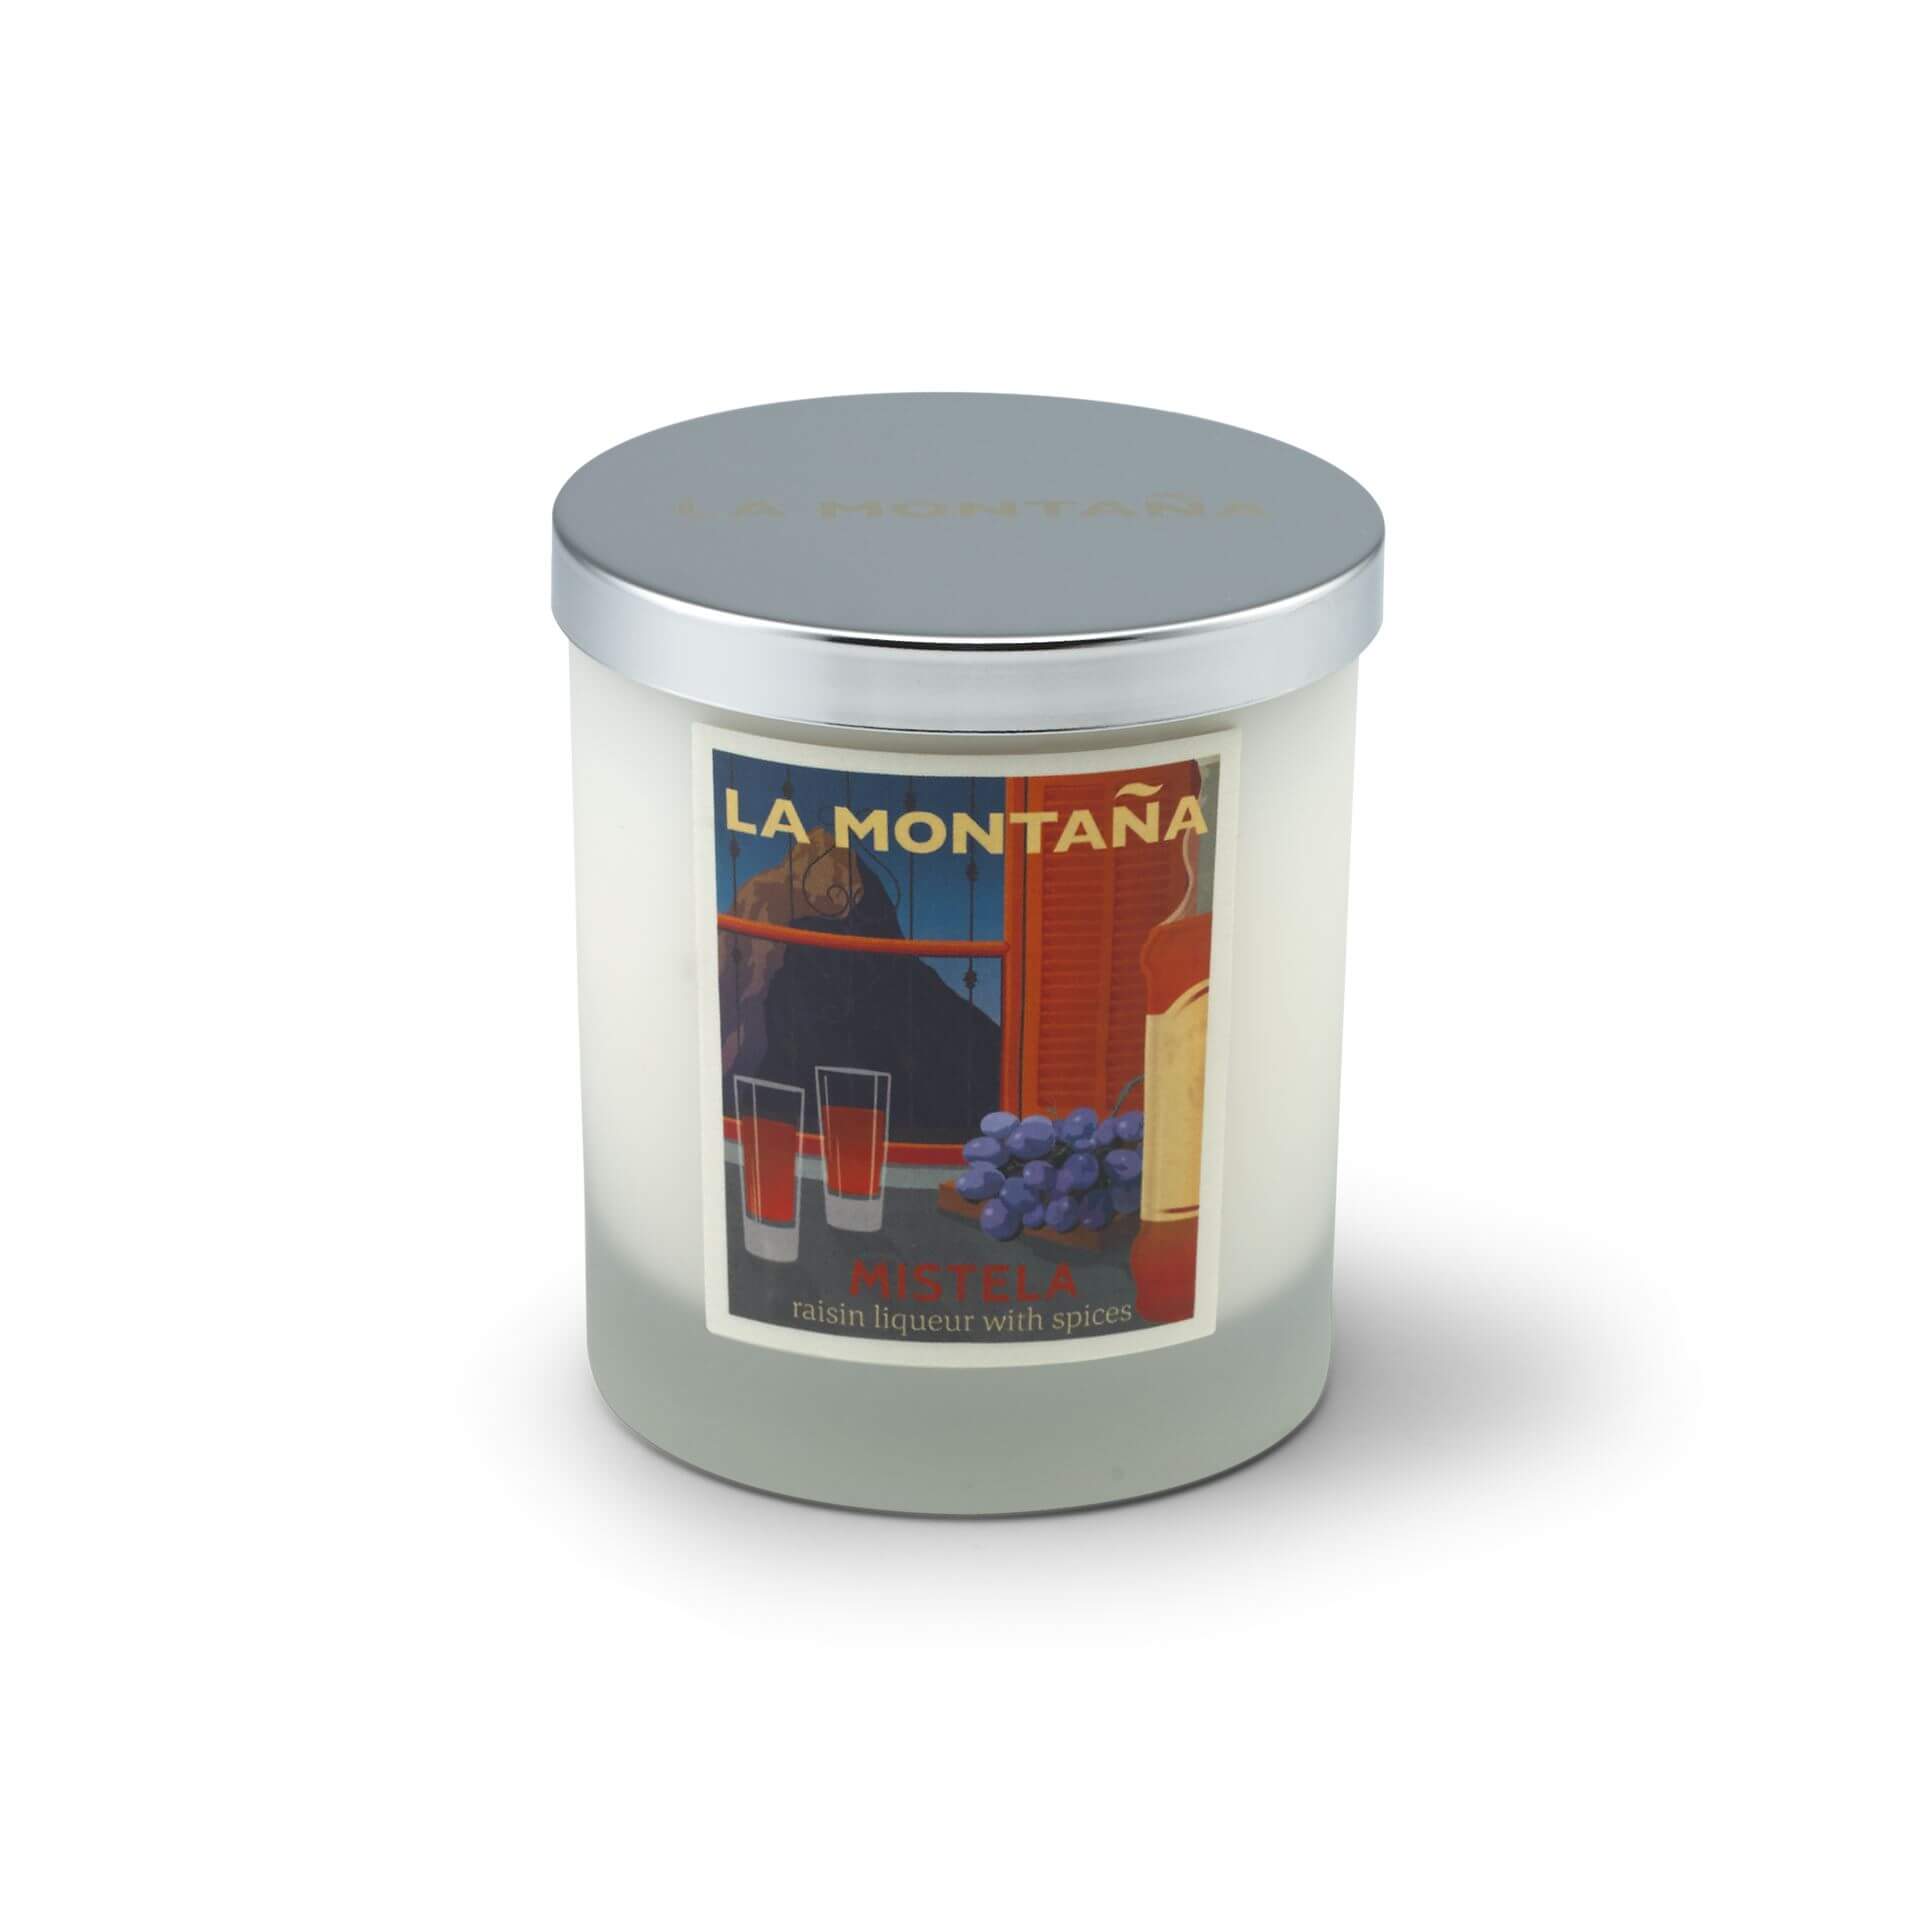 La Montaña Mistela Scented Candle - Osmology Scented Candles & Home Fragrance